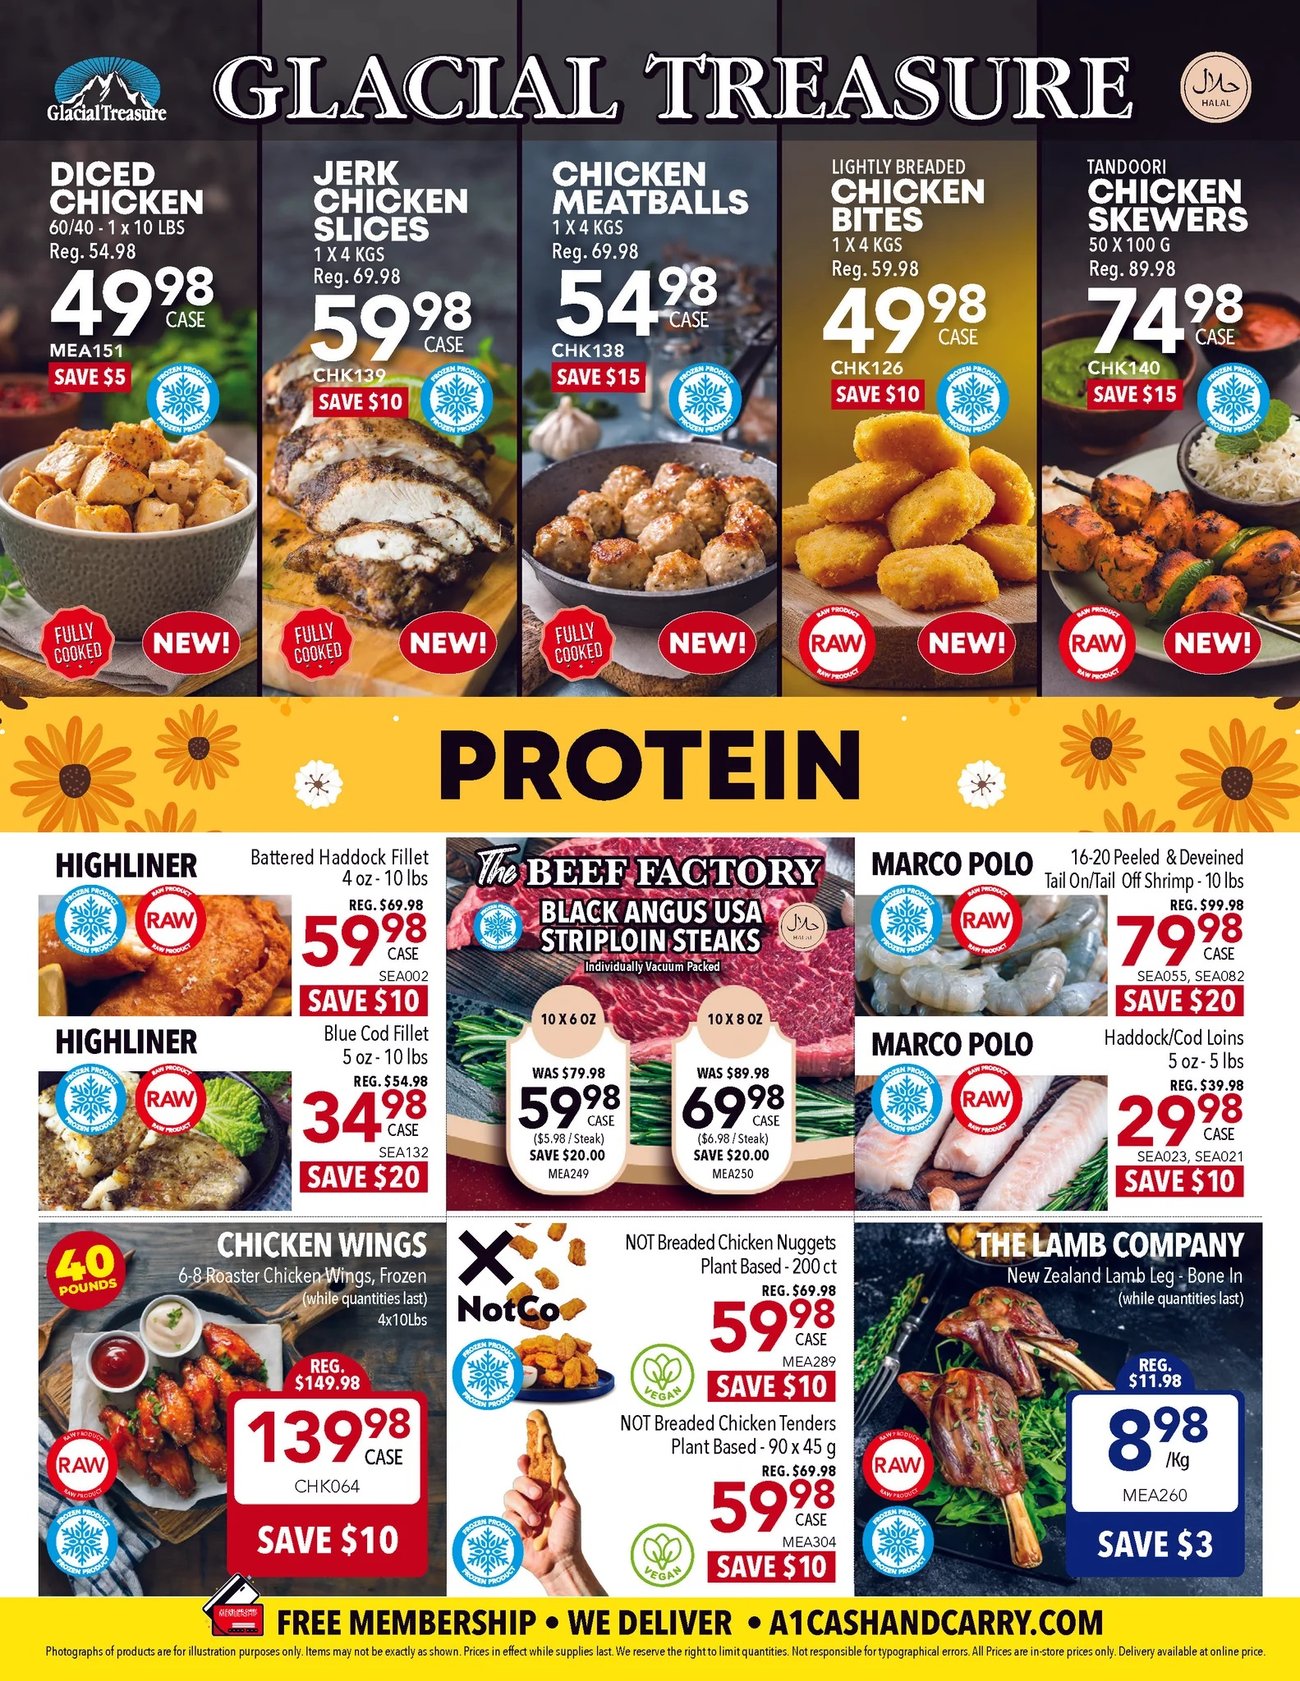 A1 Cash & Carry - Flyer Specials - Page 6